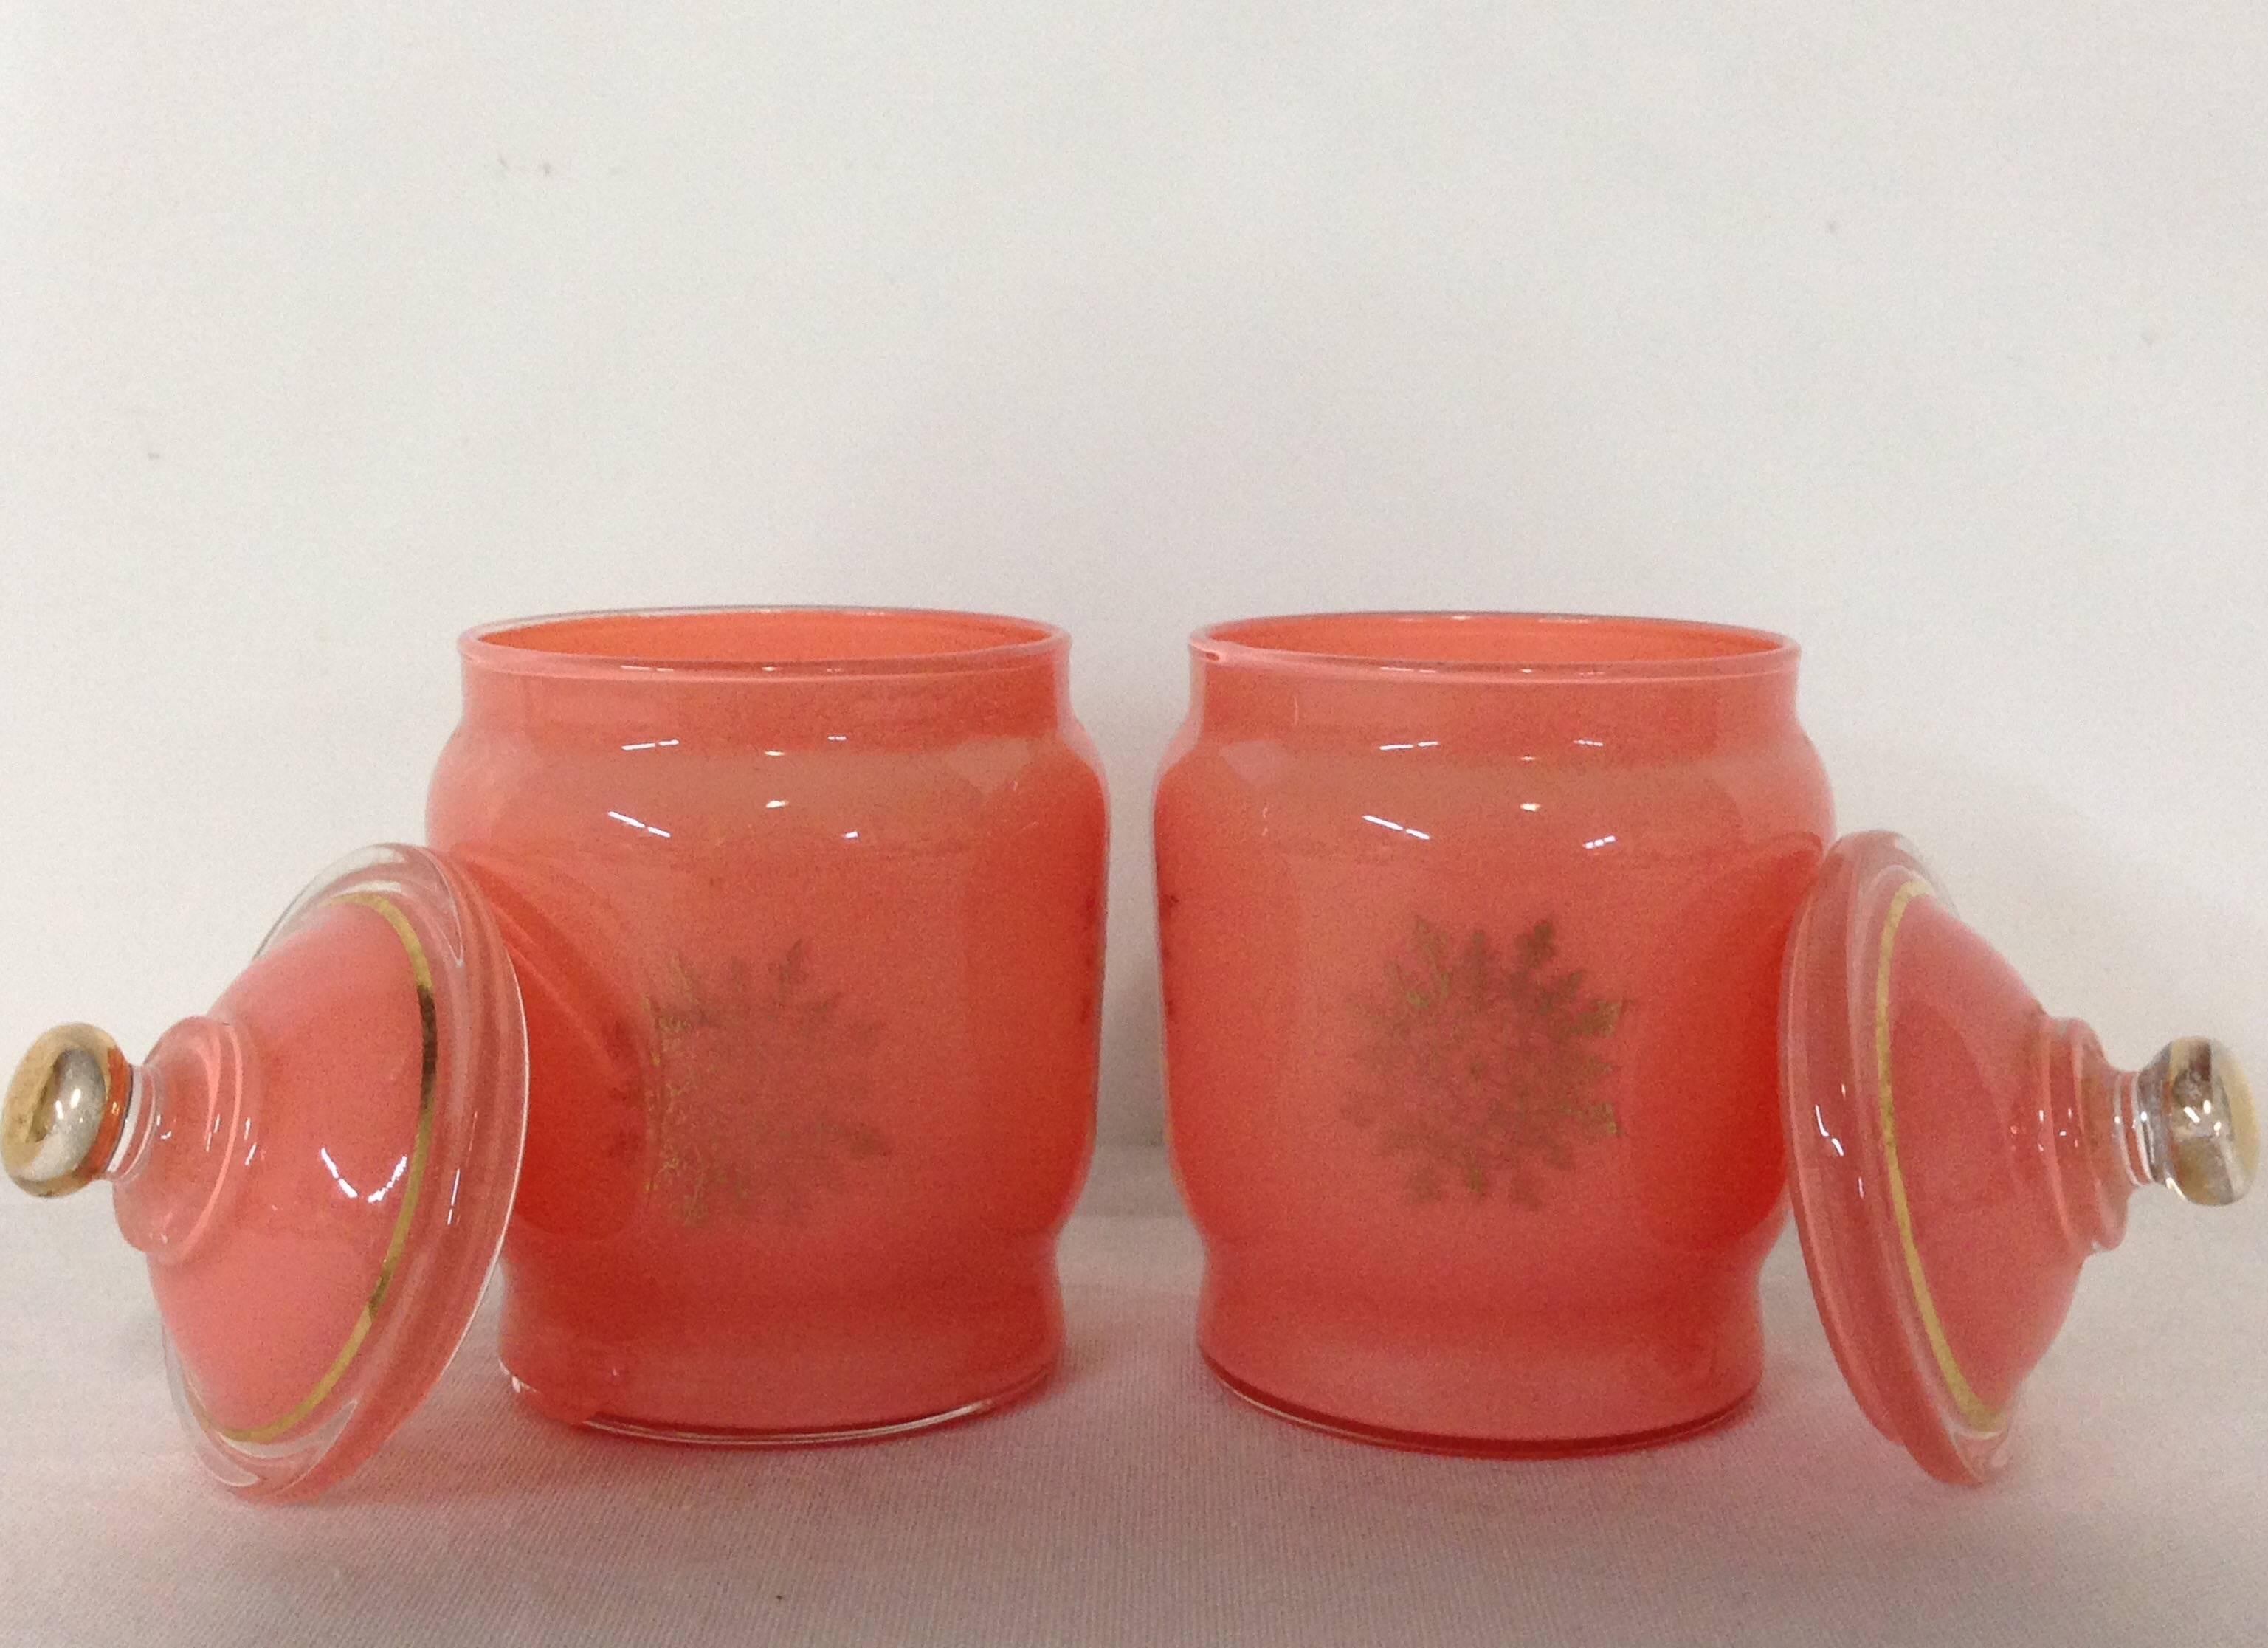 Pair of rare opaline vanity jars with distinctive gold snowflake center and detail/ embellishment.